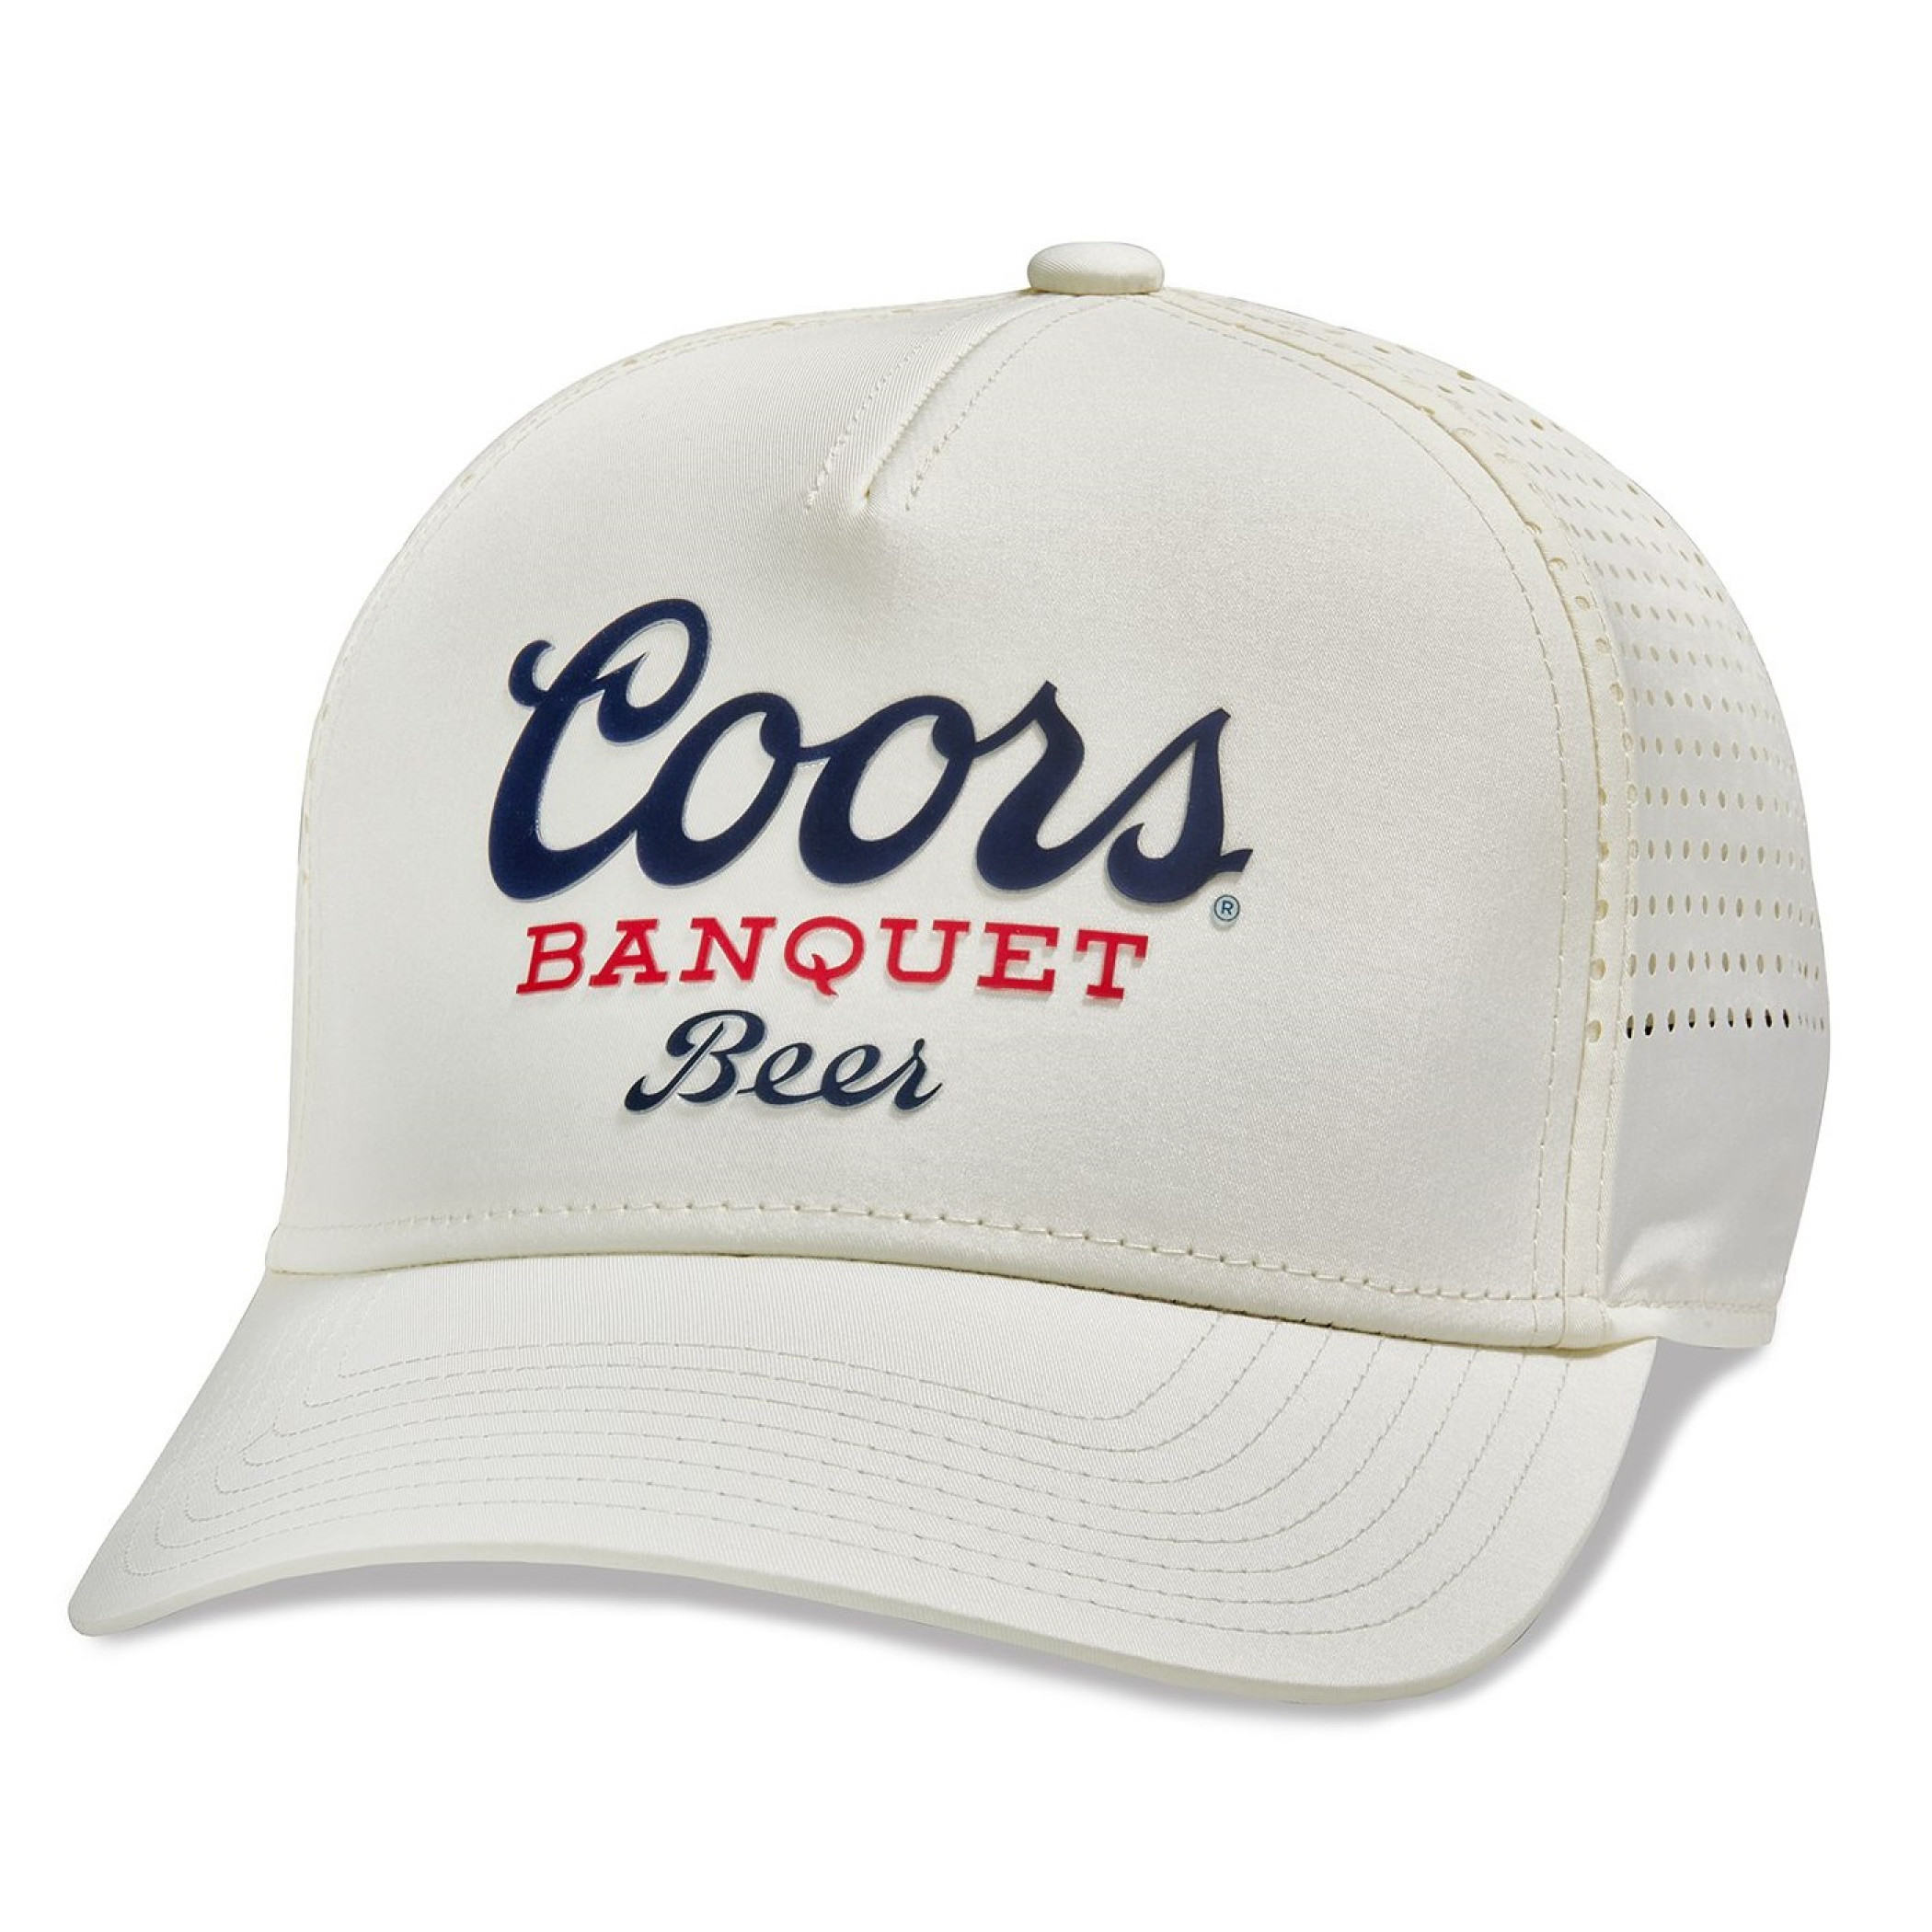 Coors Banquet Beer Pacific Coast Style Hat